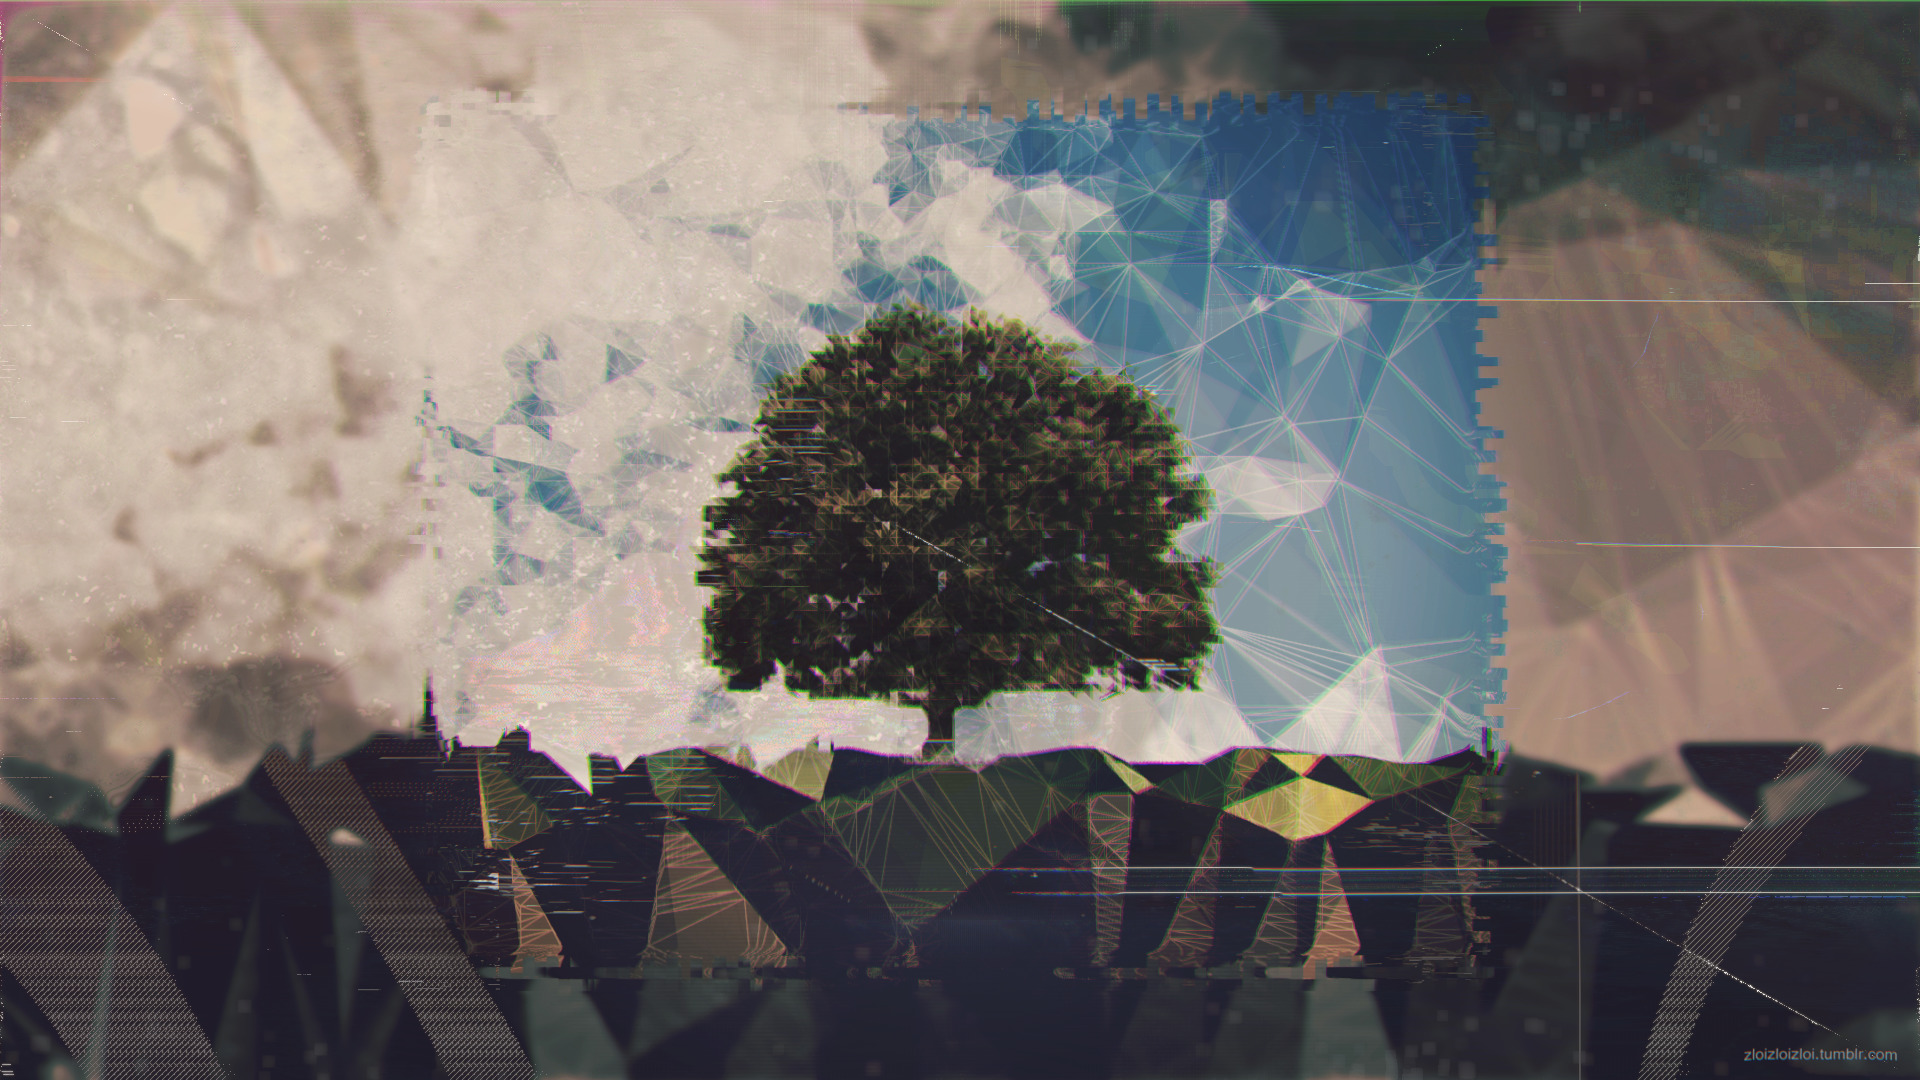 glitch art, Noise, Abstract, Landscape, Nature, Low poly, Trees, Digital art, Sky Wallpaper